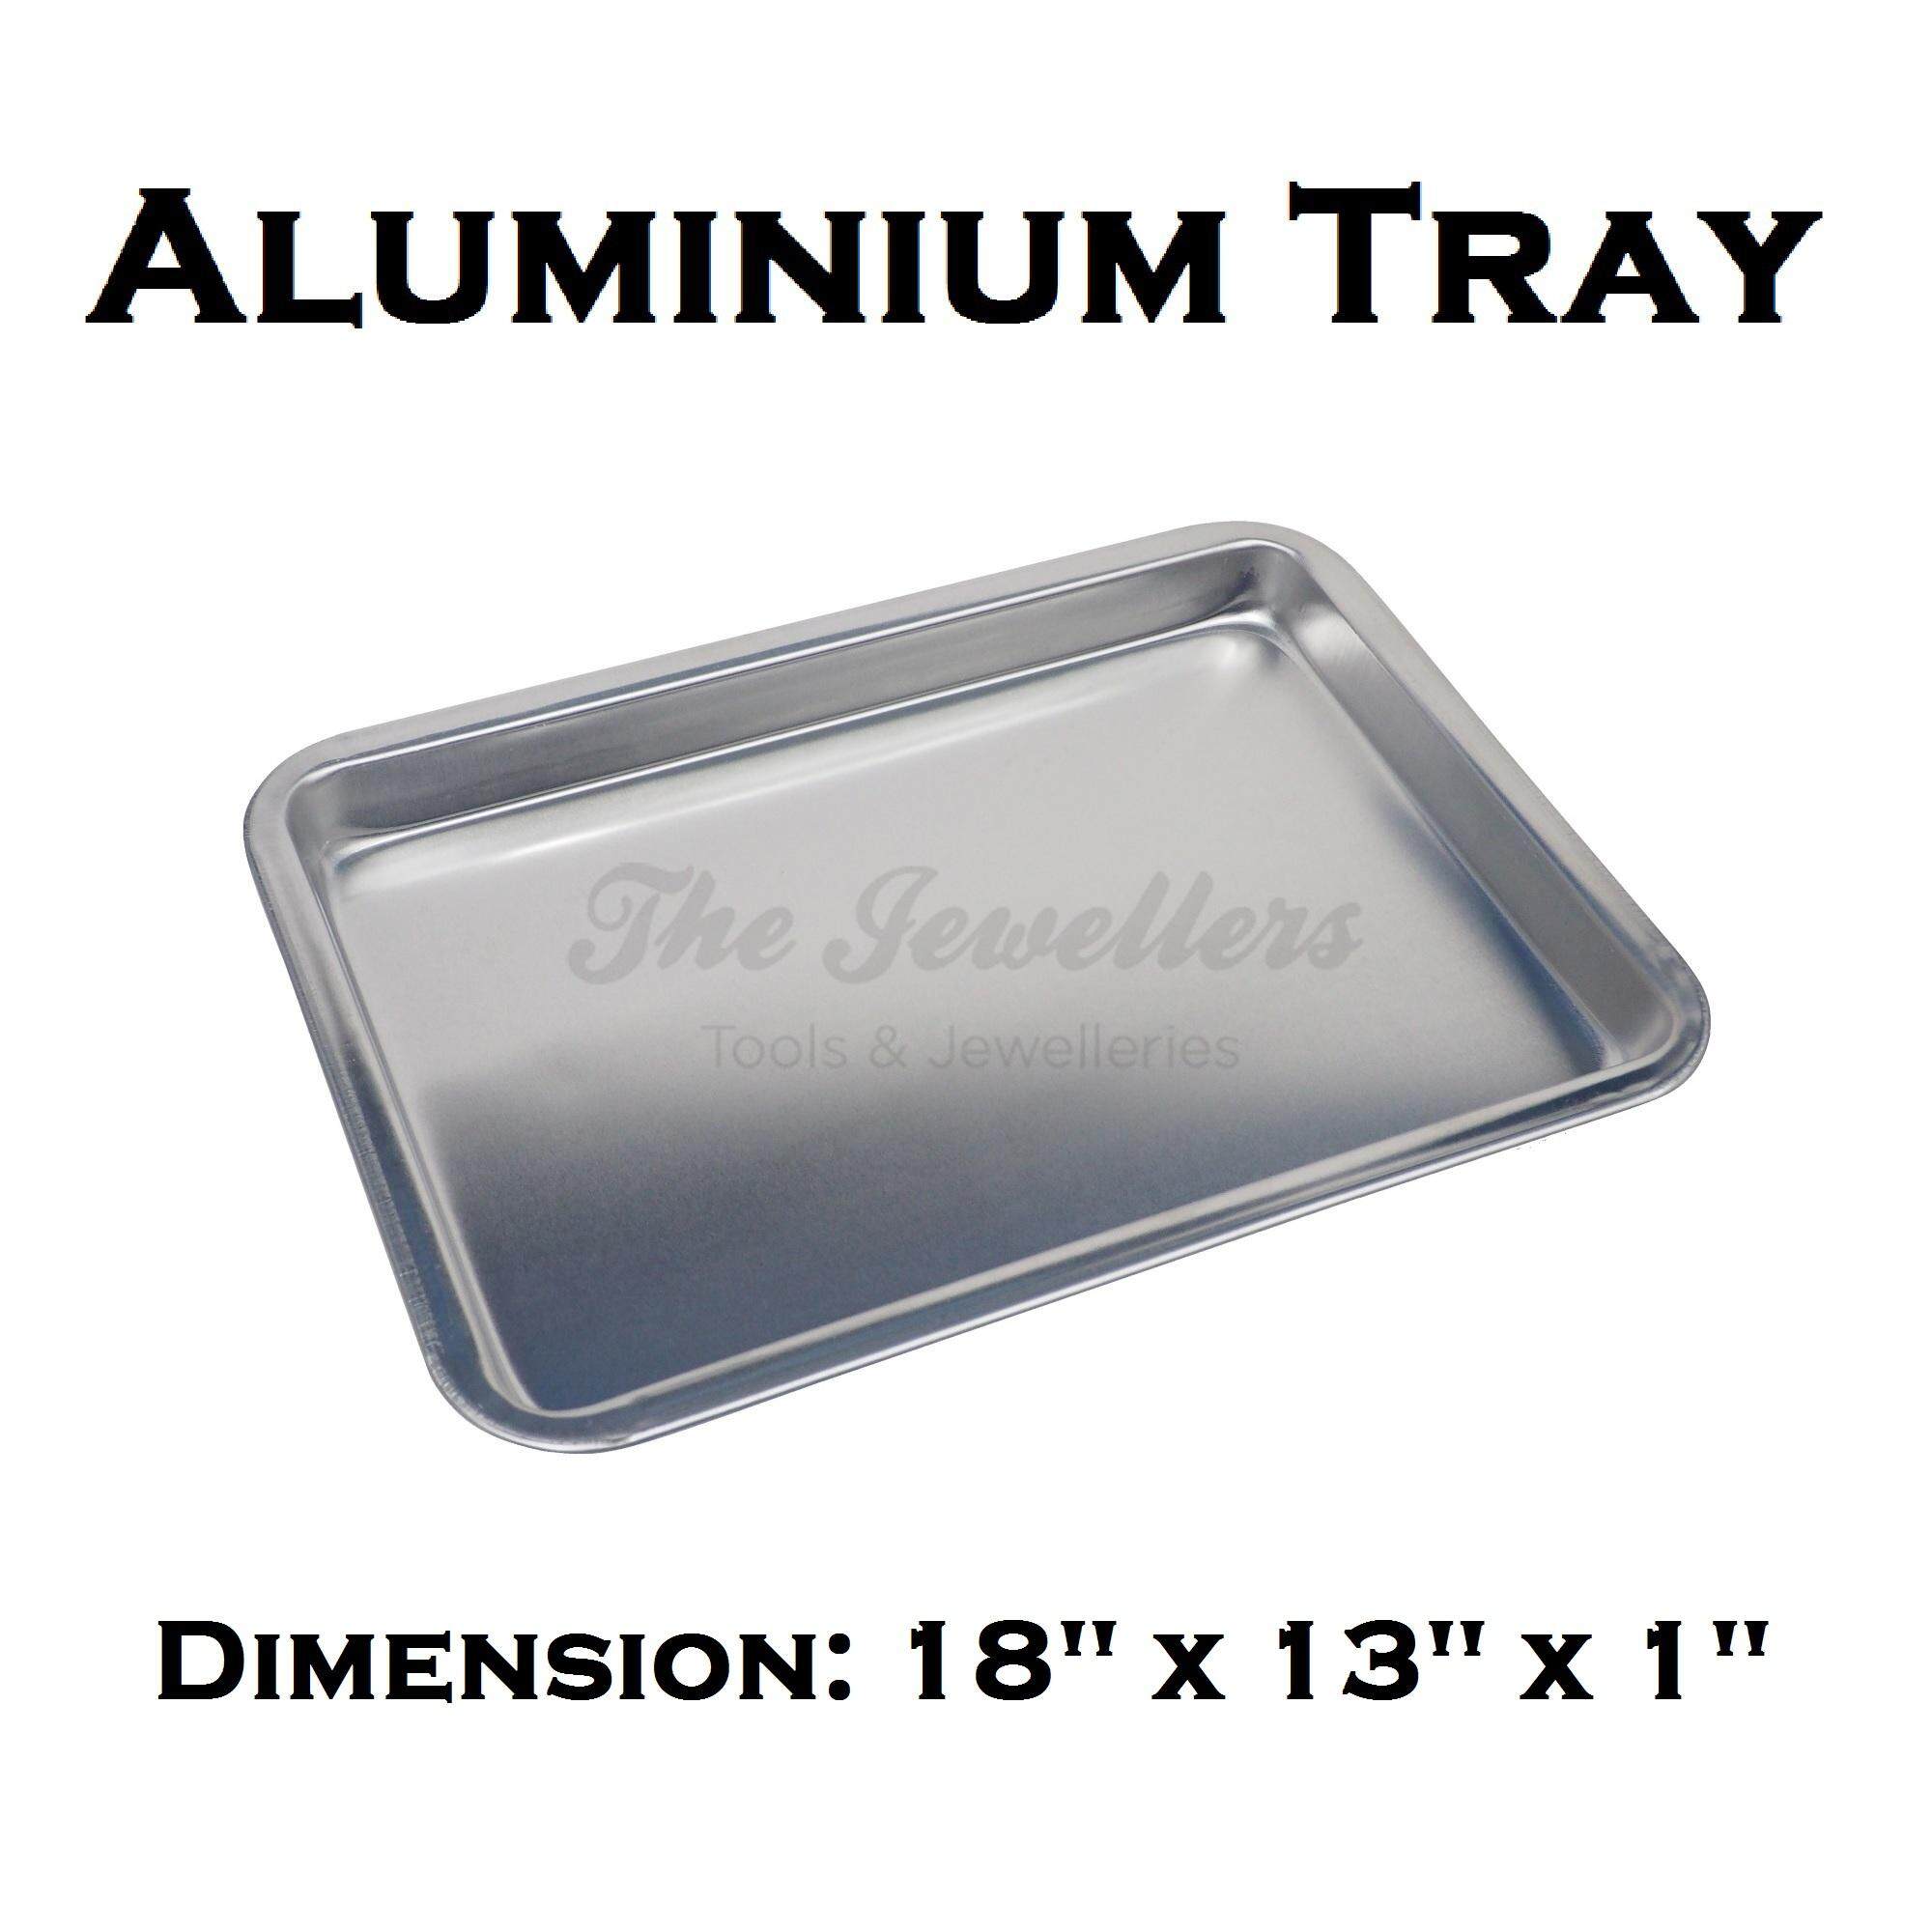 Aluminium Tray Bakeware Oven Sheet, Baking Pan Tray for Cookies, Pizza, and Cakes Dimension: 18" x 13" x 1" inch